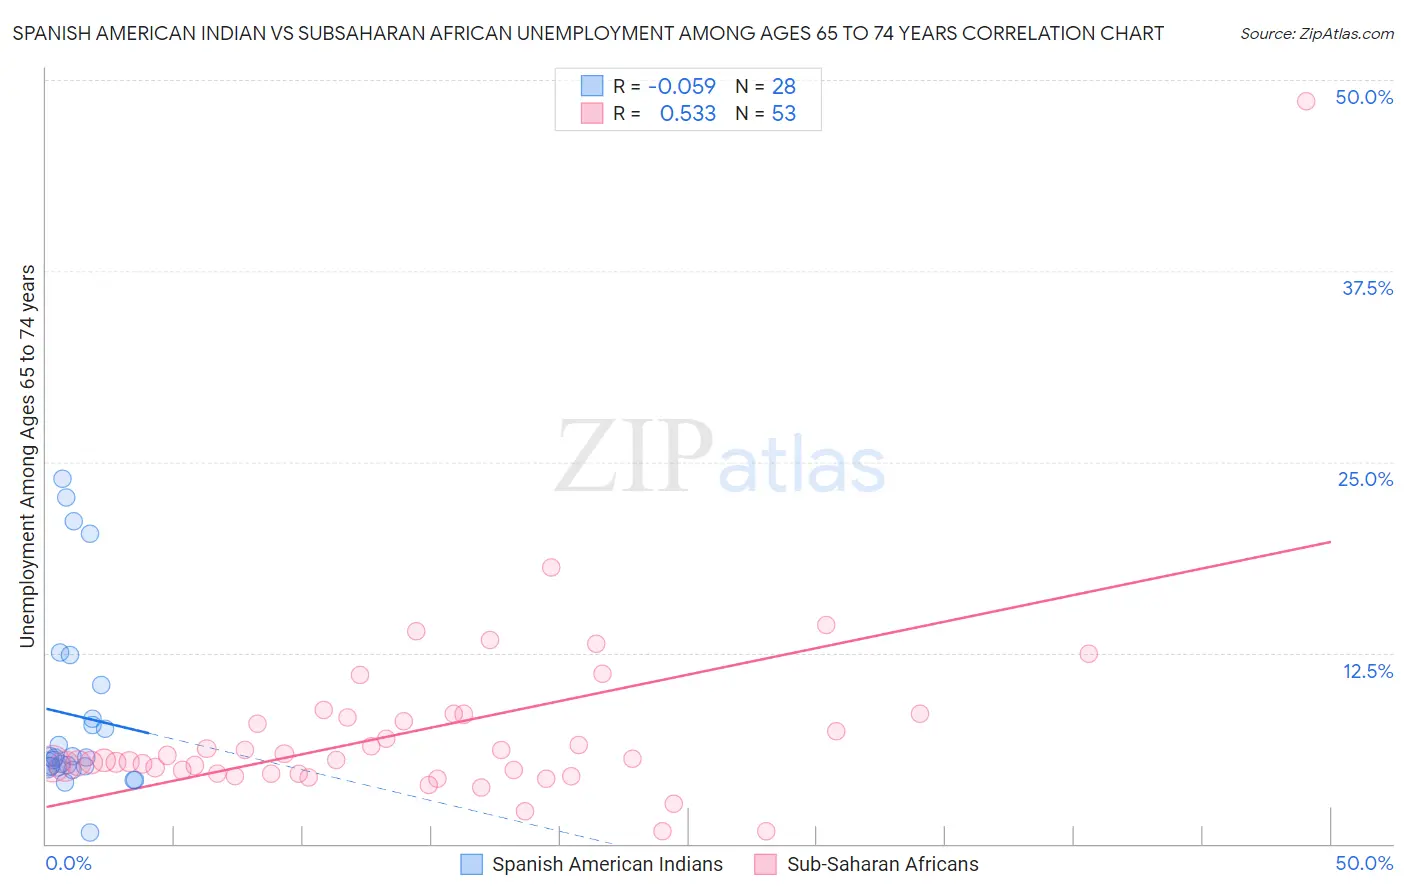 Spanish American Indian vs Subsaharan African Unemployment Among Ages 65 to 74 years